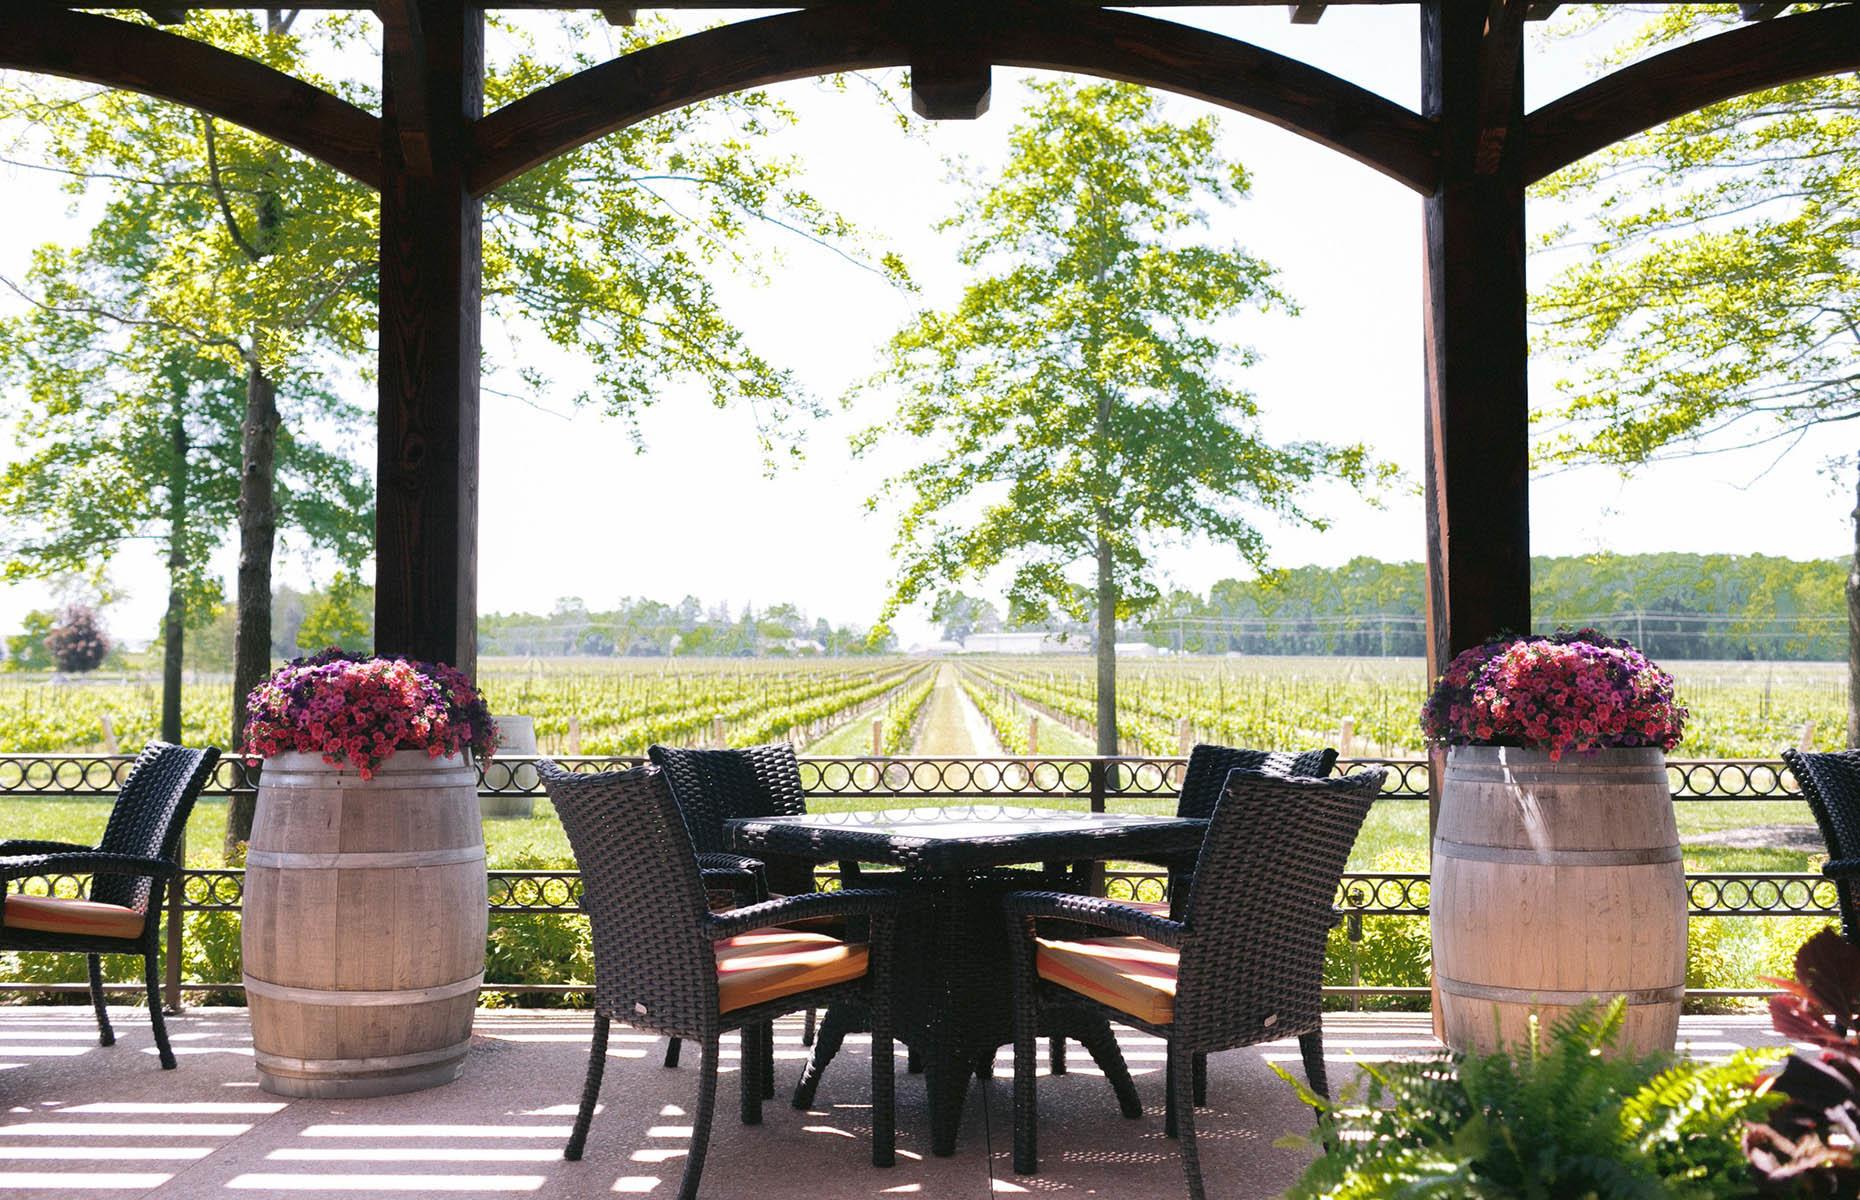 <p>Wine fans will relish the prospect of visiting top-class vineyards in Niagara-On-The-Lake, particularly <a href="https://www.peller.com/">Peller Estate</a> and <a href="https://www.twosistersvineyards.com/">Two Sisters</a>. The Peller brand can be spotted all over Ontario and is worth the hype.</p>  <p>Tours include tastings from the 44-acre estate’s wine portfolio, with a stop off in the 10Below Icewine Lounge – an igloo-esque room that’s kept at 14°F, where you can sample the painstakingly delicious icewine; just 1mm is produced from 10 grapes. Two Sisters’ John Street Vineyard spans 68 acres, where merlot, cabernet sauvignon, cabernet franc, and chardonnay varietals thrive.</p>  <p>The award-winning winery offers a tasting flight of four premium wines; our advice is to choose the cabernet franc – a fruity ruby red that’s been crafted in French oak for 30 months. Cheers!</p>